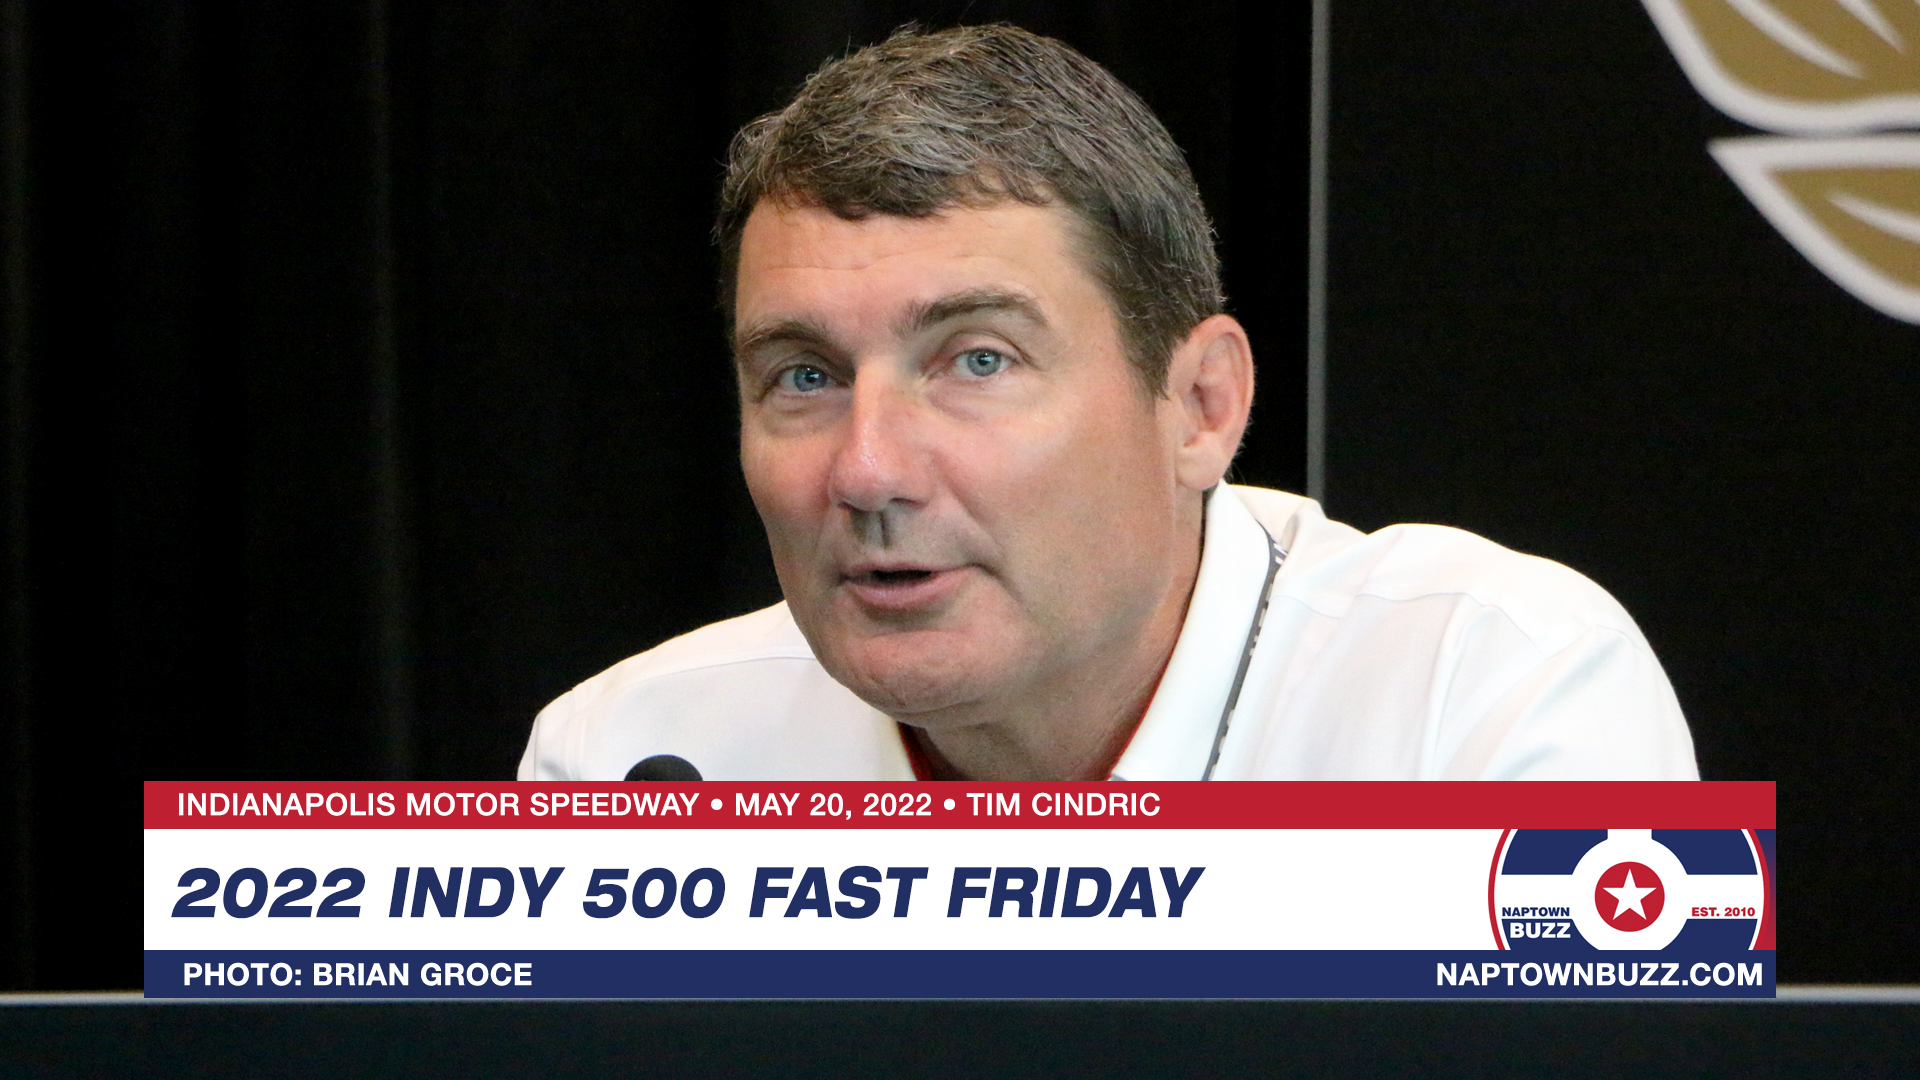 Tim Cindric on Indy 500 Fast Friday Practice at Indianapolis Motor Speedway on May 20, 2022